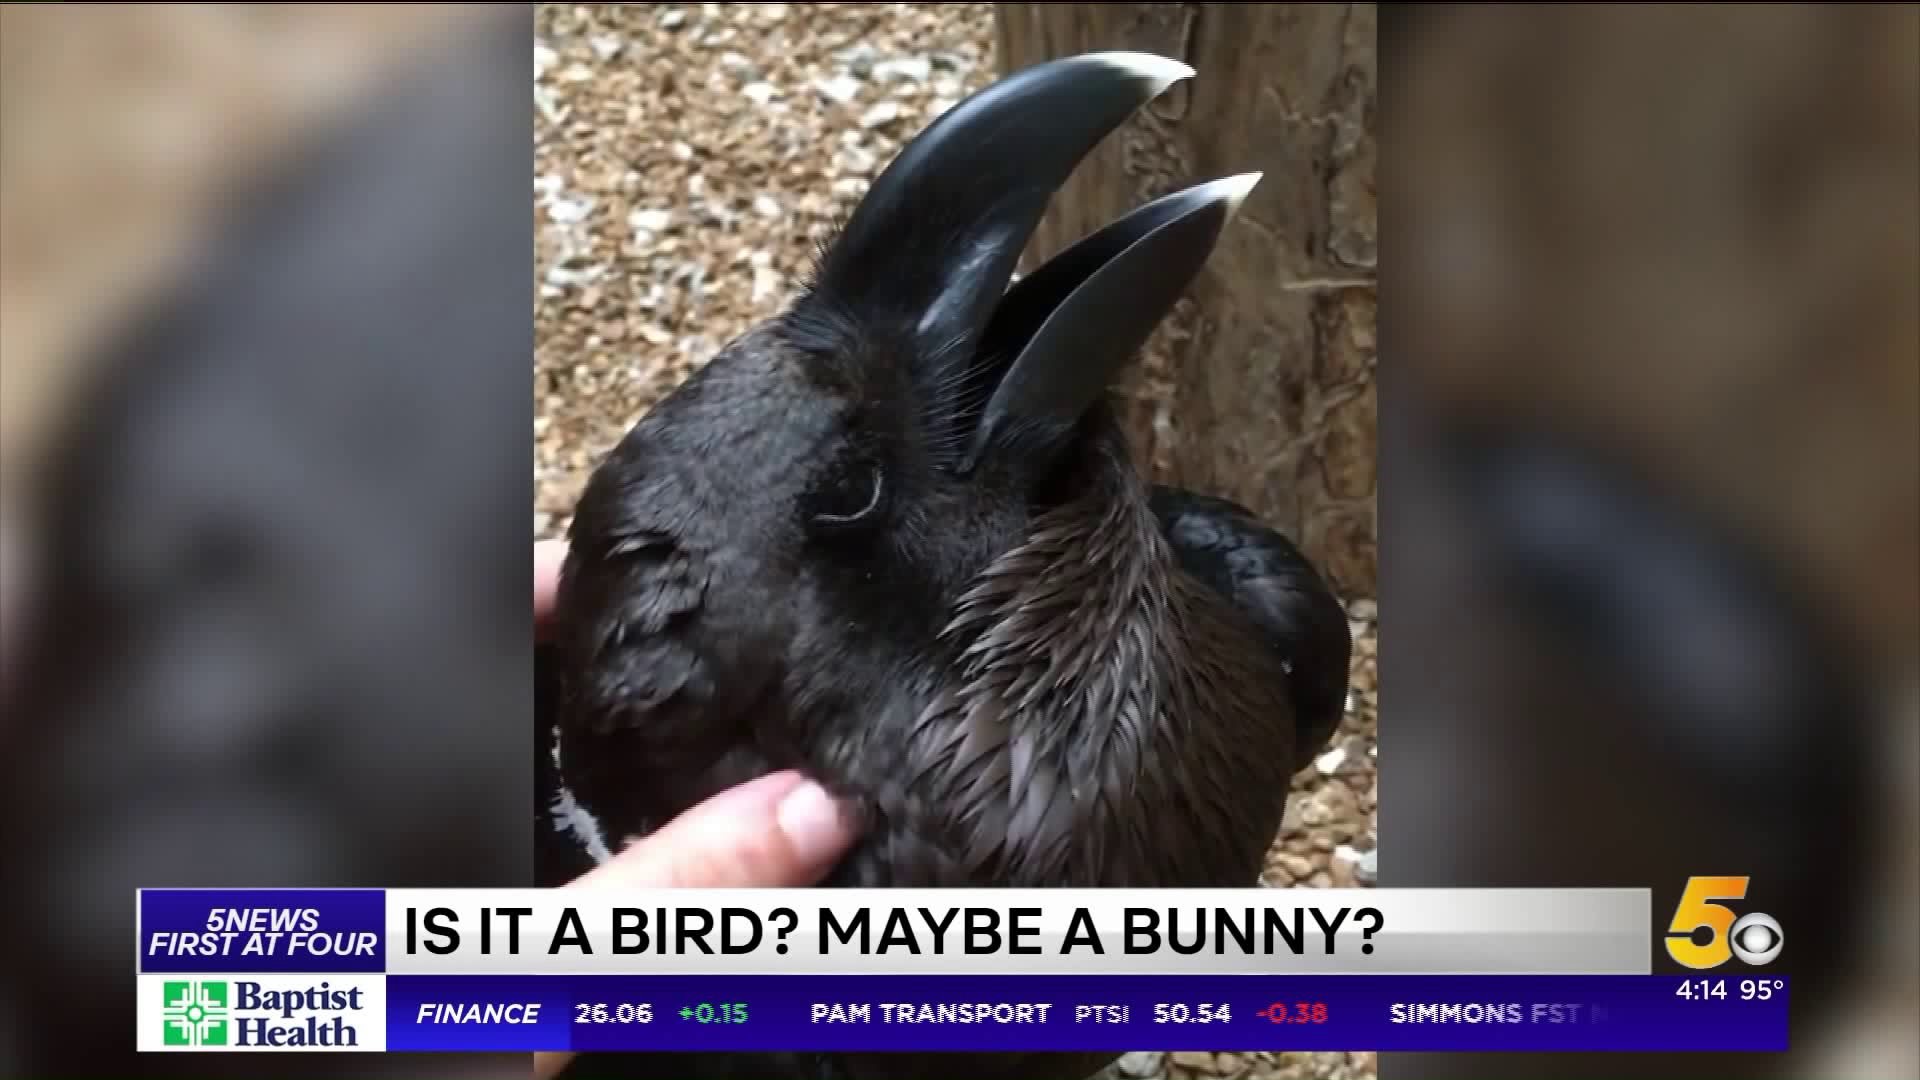 Bird Or Bunny? This Optical Illusion Is Confusing The Internet